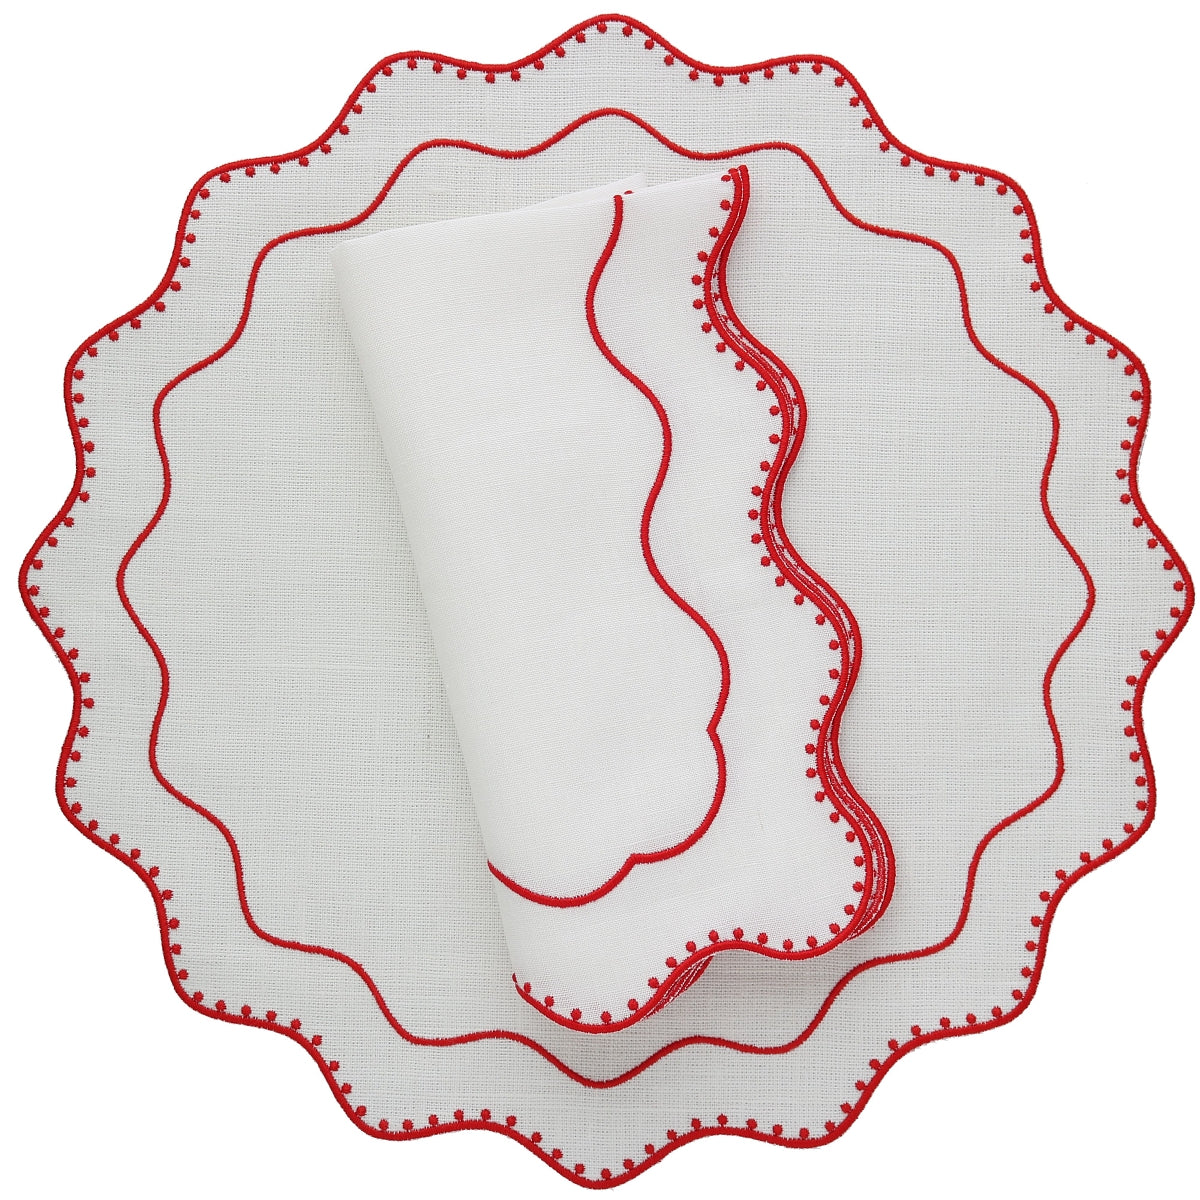 Made to order Dakota Dotted Scallops Linen Napkins and Placemats (set of 4)